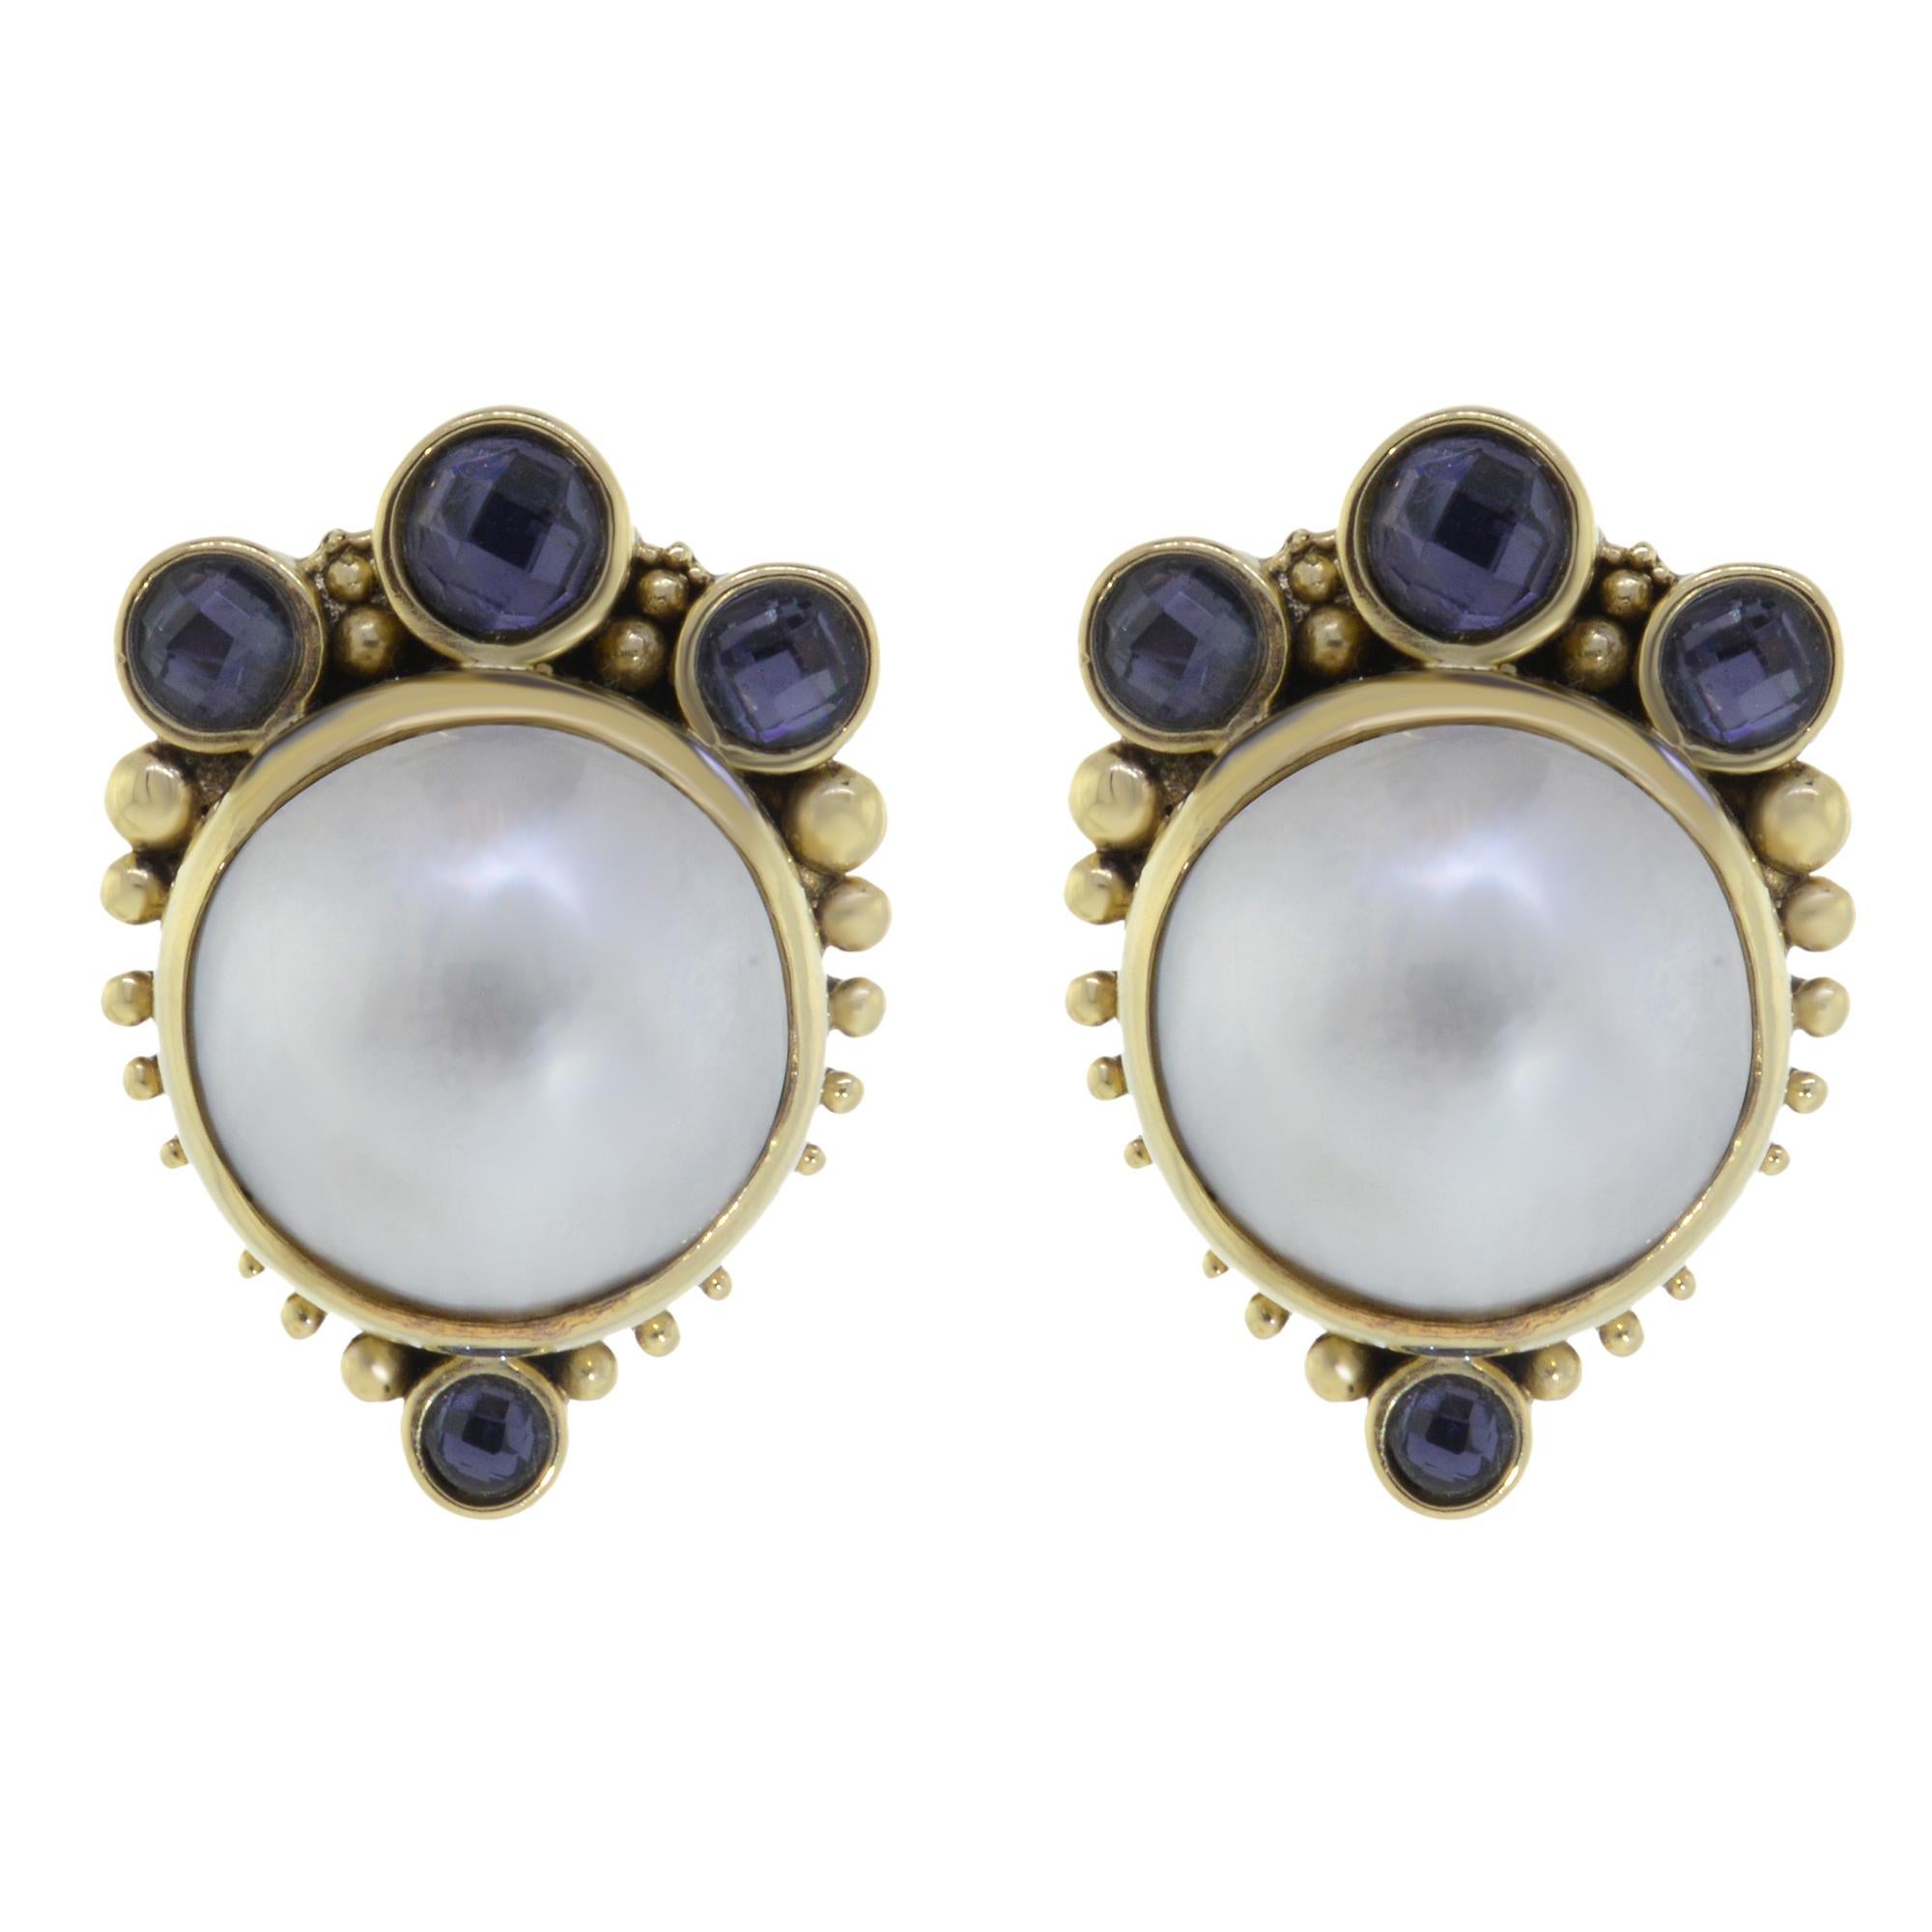 This 100% authentic Stephen Dweck jewelry set includes a pair of earring and a matching pendant. The set is crafted in 18K yellow gold with 21 x 21mm white pearl cabochon and 14 amethyst stones. Size of the pendant: 45mm. Length of the earrings: 28